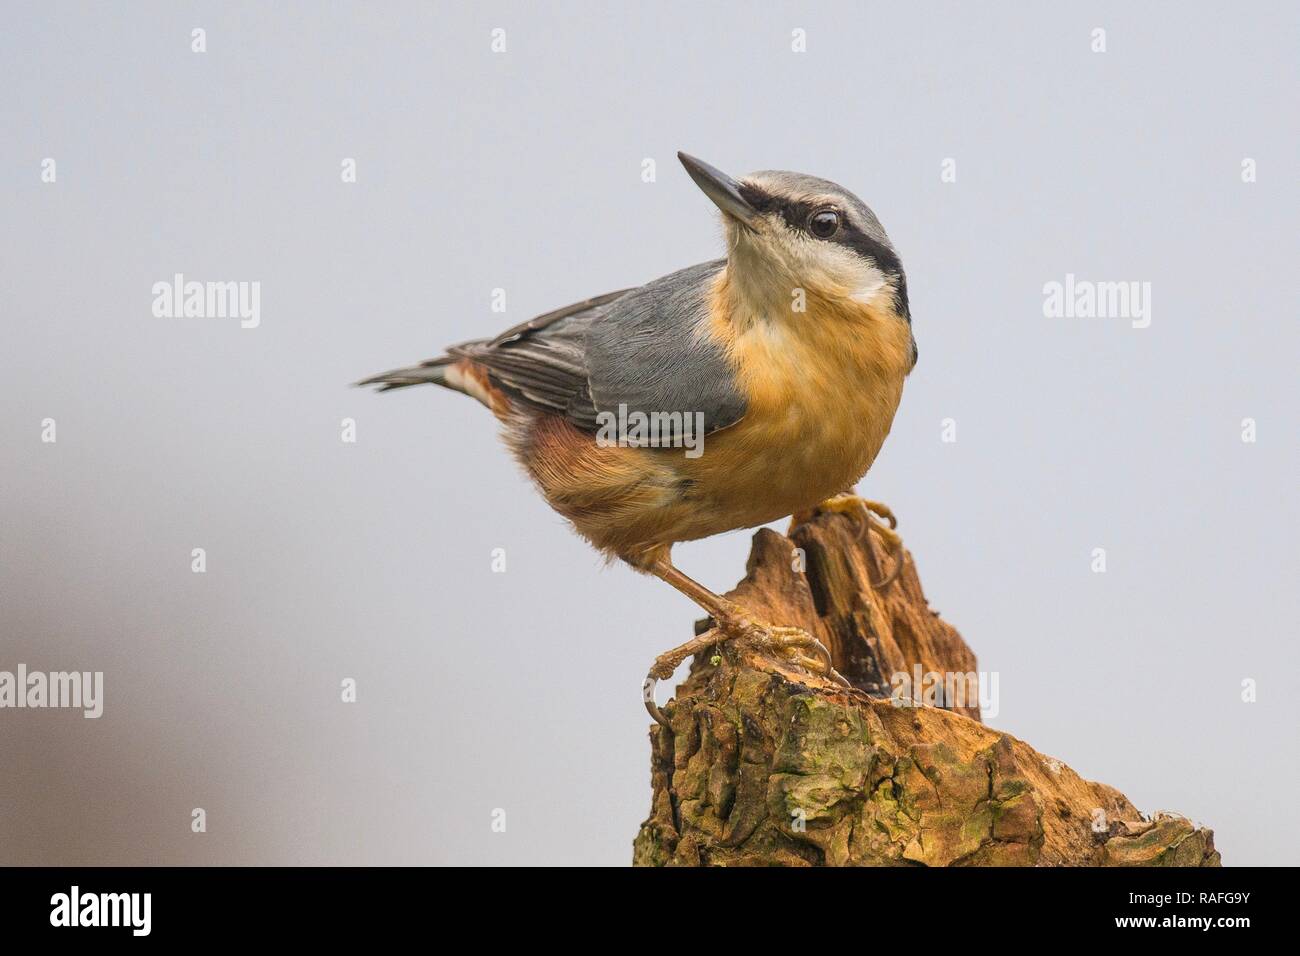 Nuthatch perched on a tree Stock Photo